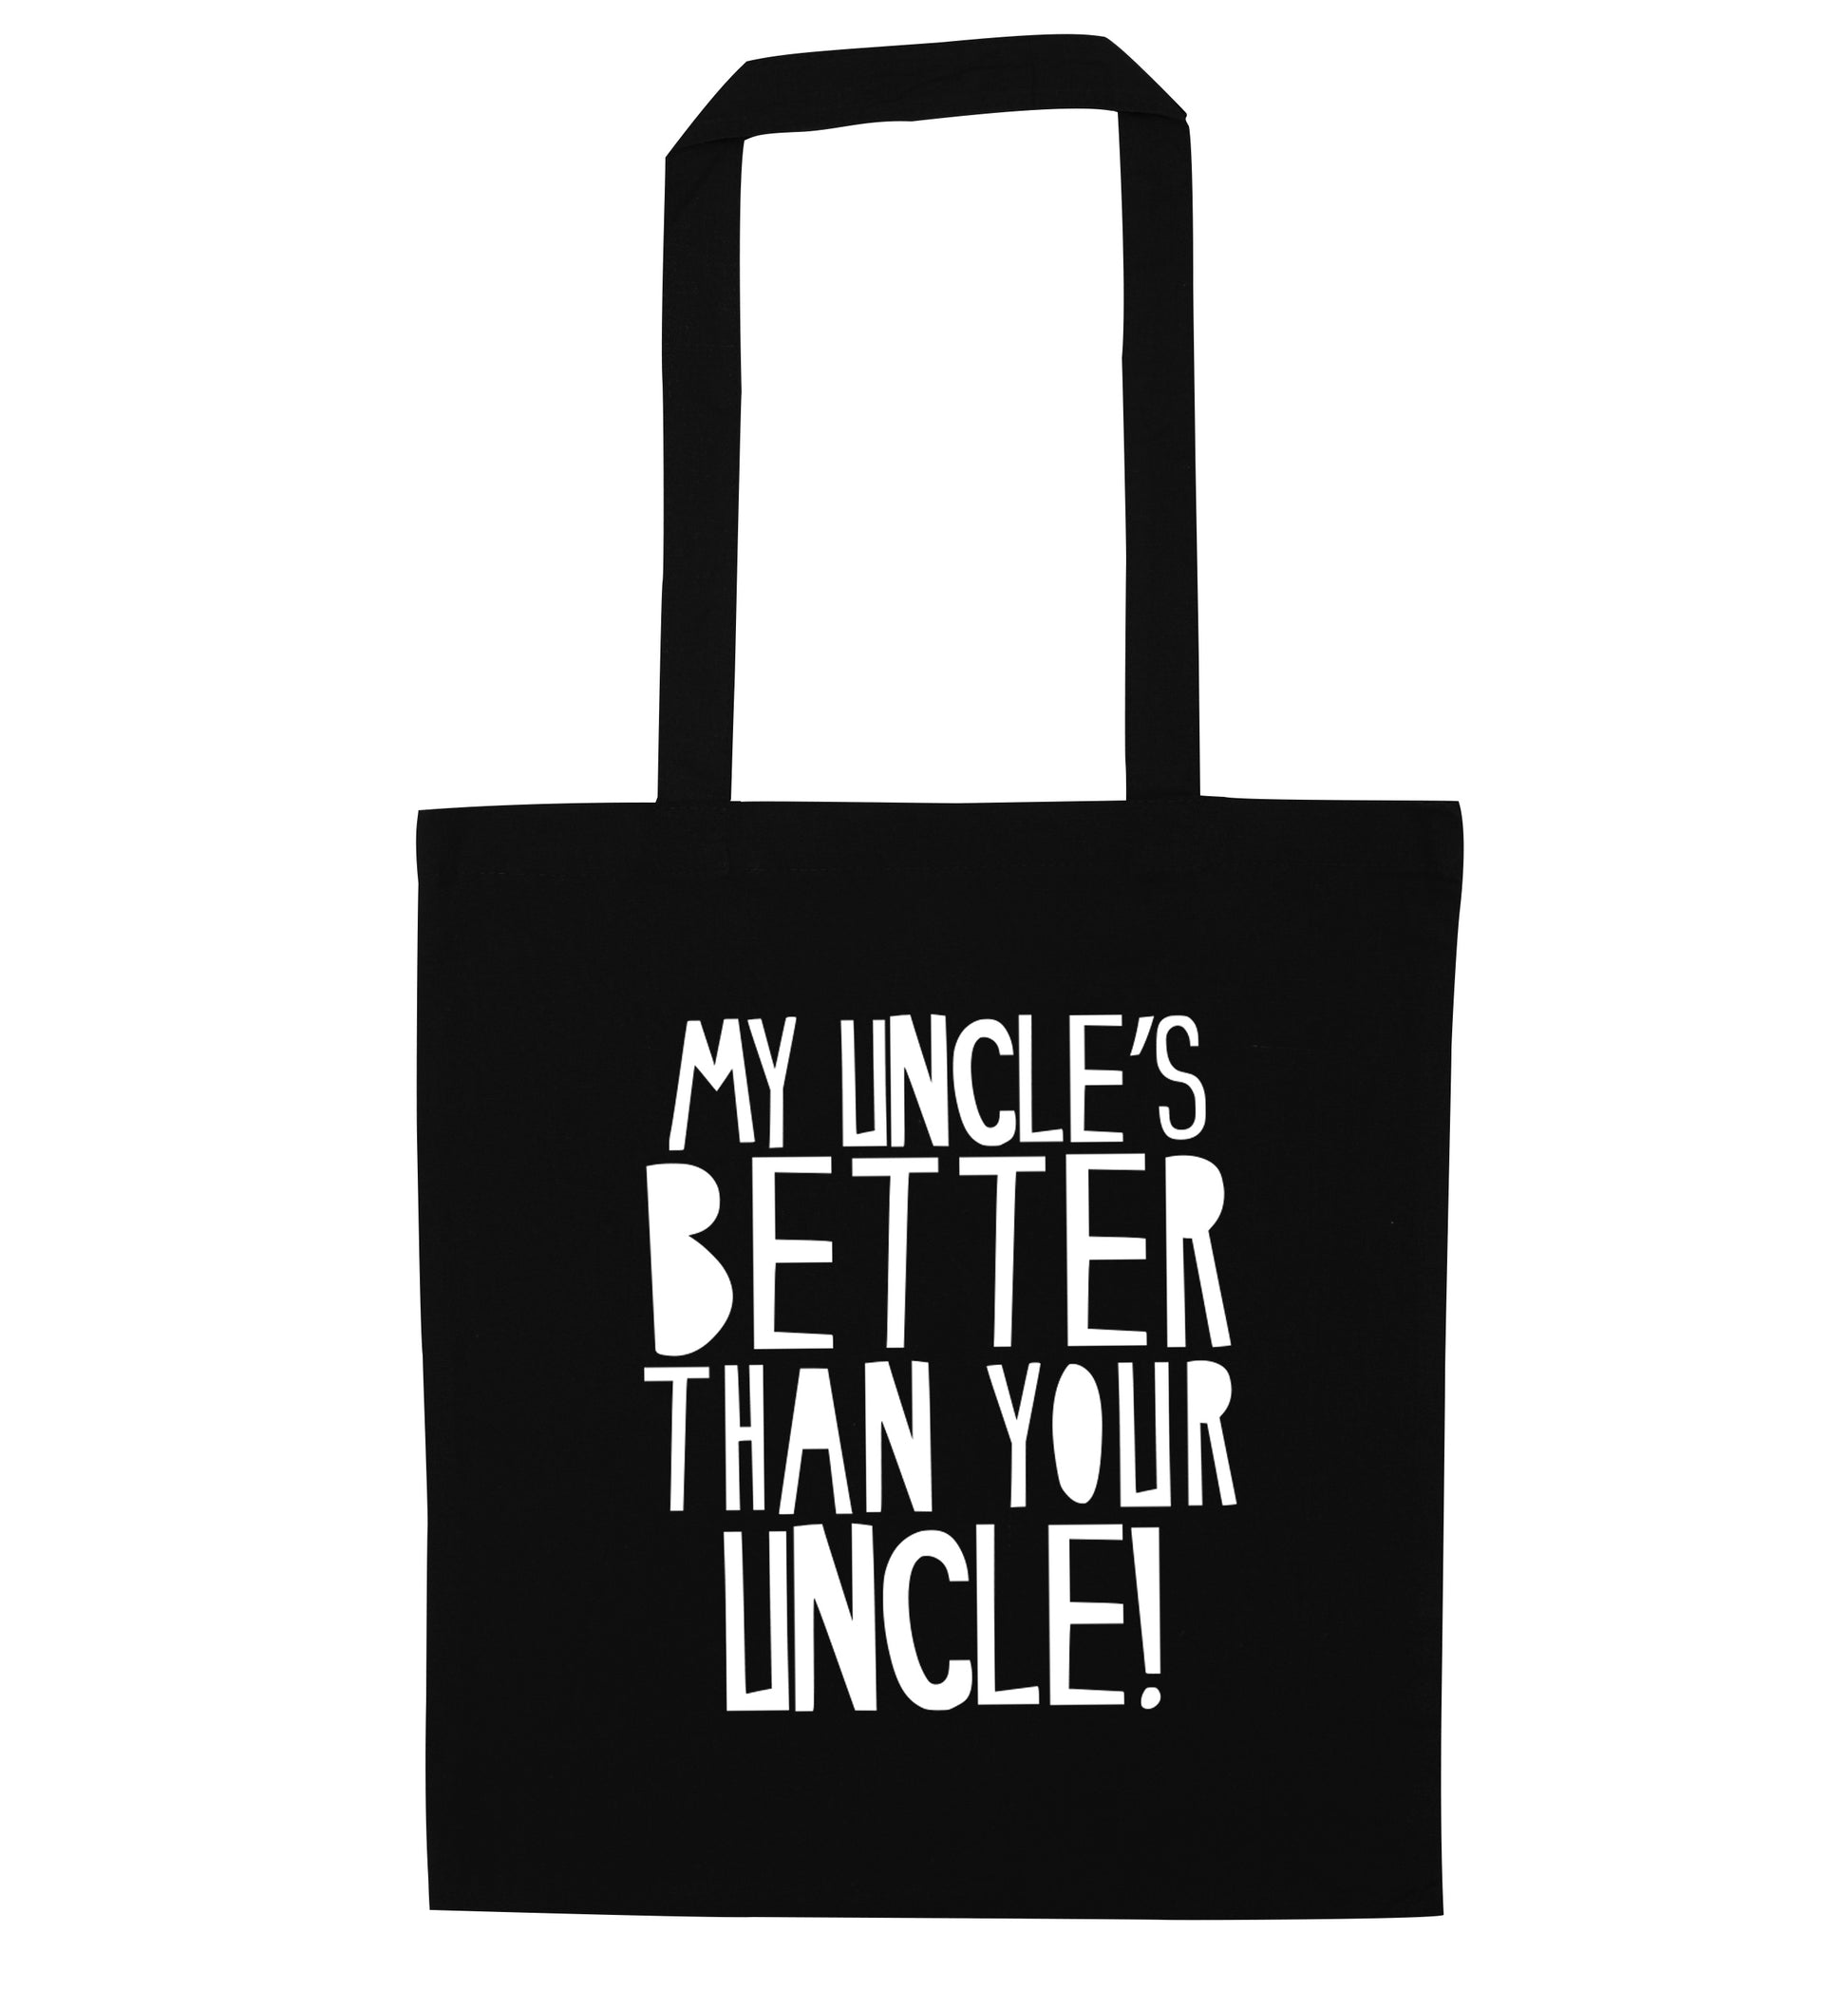 My uncles better than your uncle black tote bag